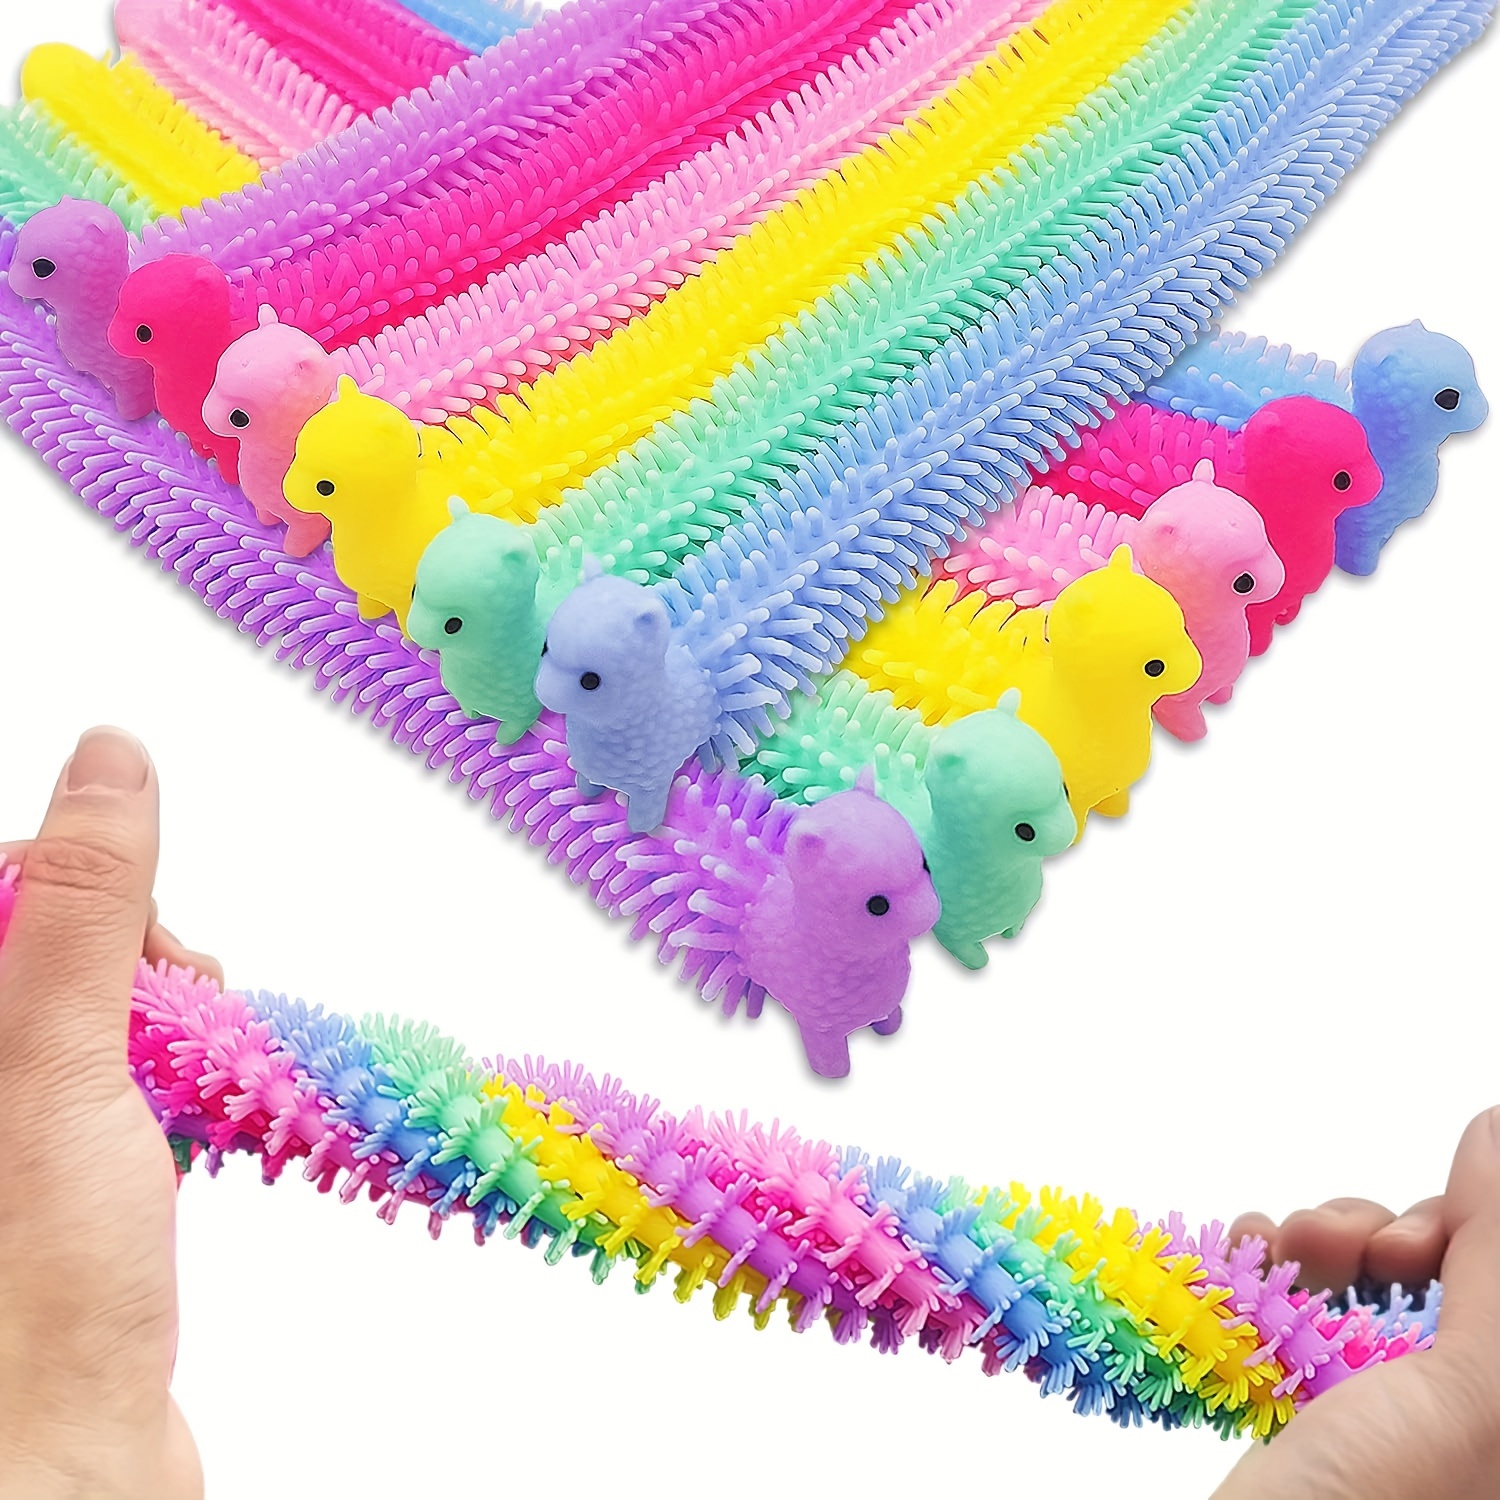 

24-piece Stretchy String Play Set - Squeeze & Pull Noodles For Youngsters And Adults, Ideal Party Favors & Calming Gifts, Variety Of Colors